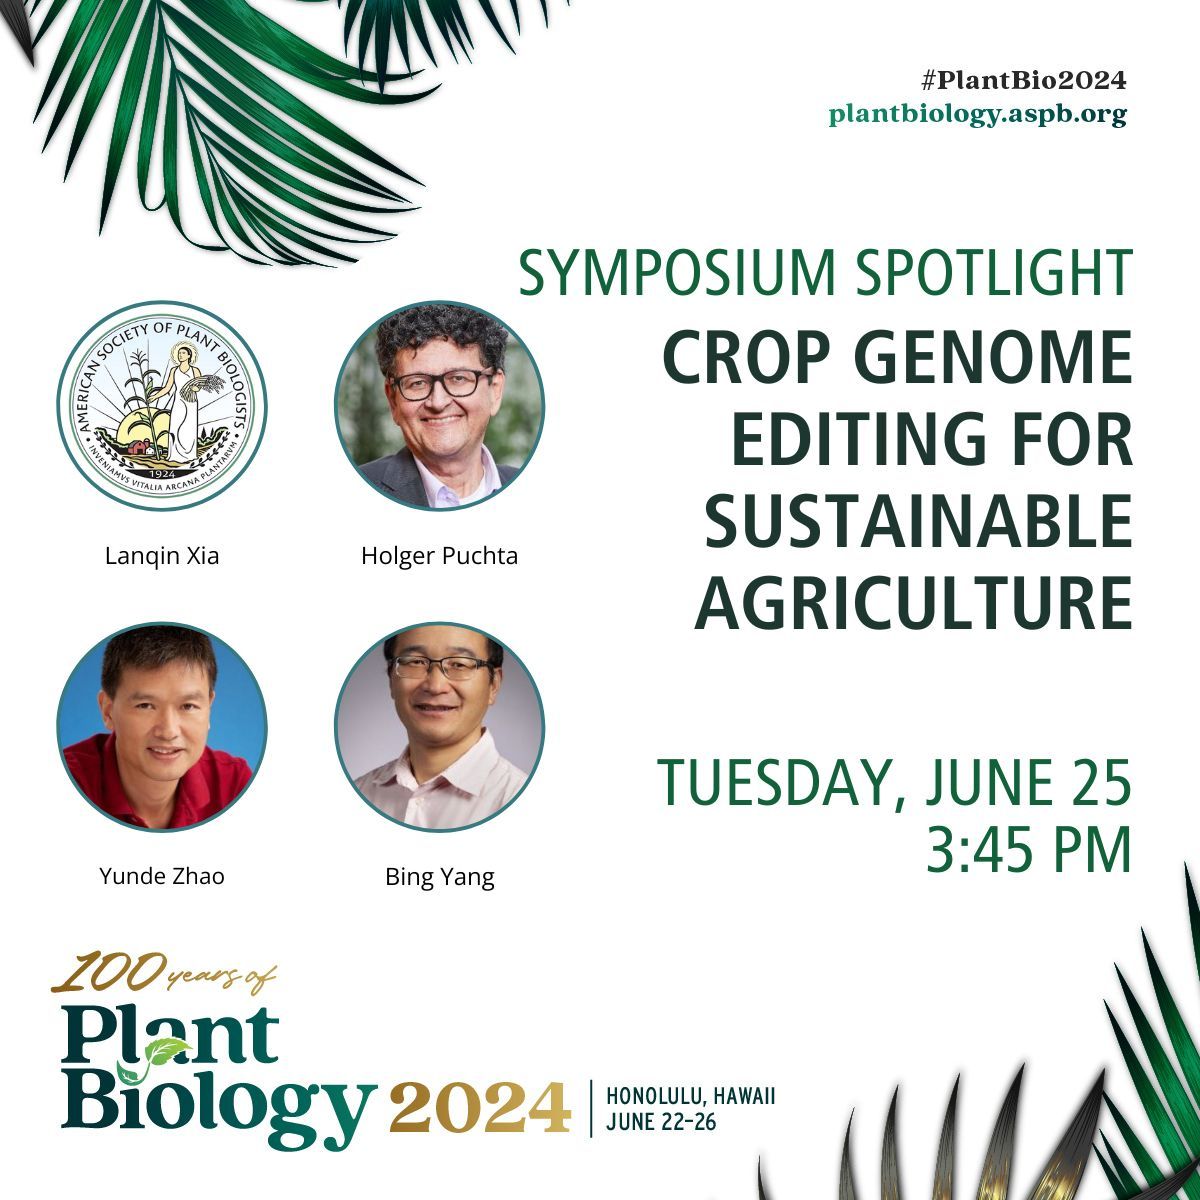 Discover how heritable translocations between heterologous chromosomes were induced, rice lines were engineered to confer resistance to bacterial blight, and more in this #PlantBio2024 symposium. Register now for discounted pricing! buff.ly/2Ij4Oxc #plantscience